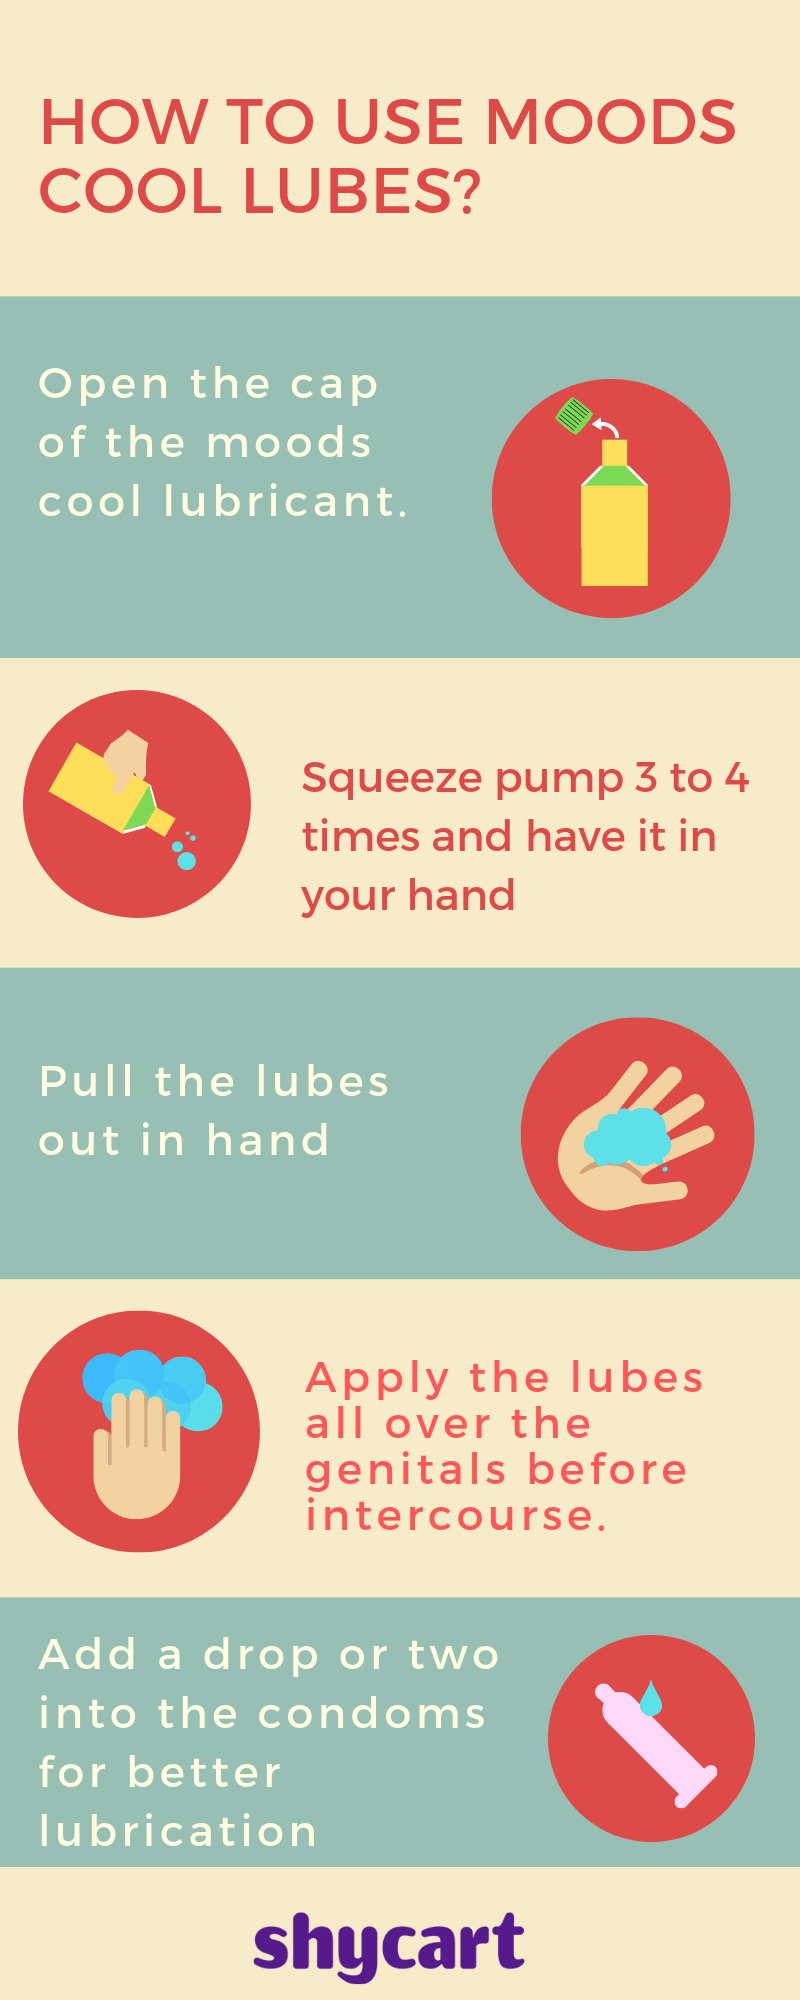 Infographic on how to use Moods cool lubes